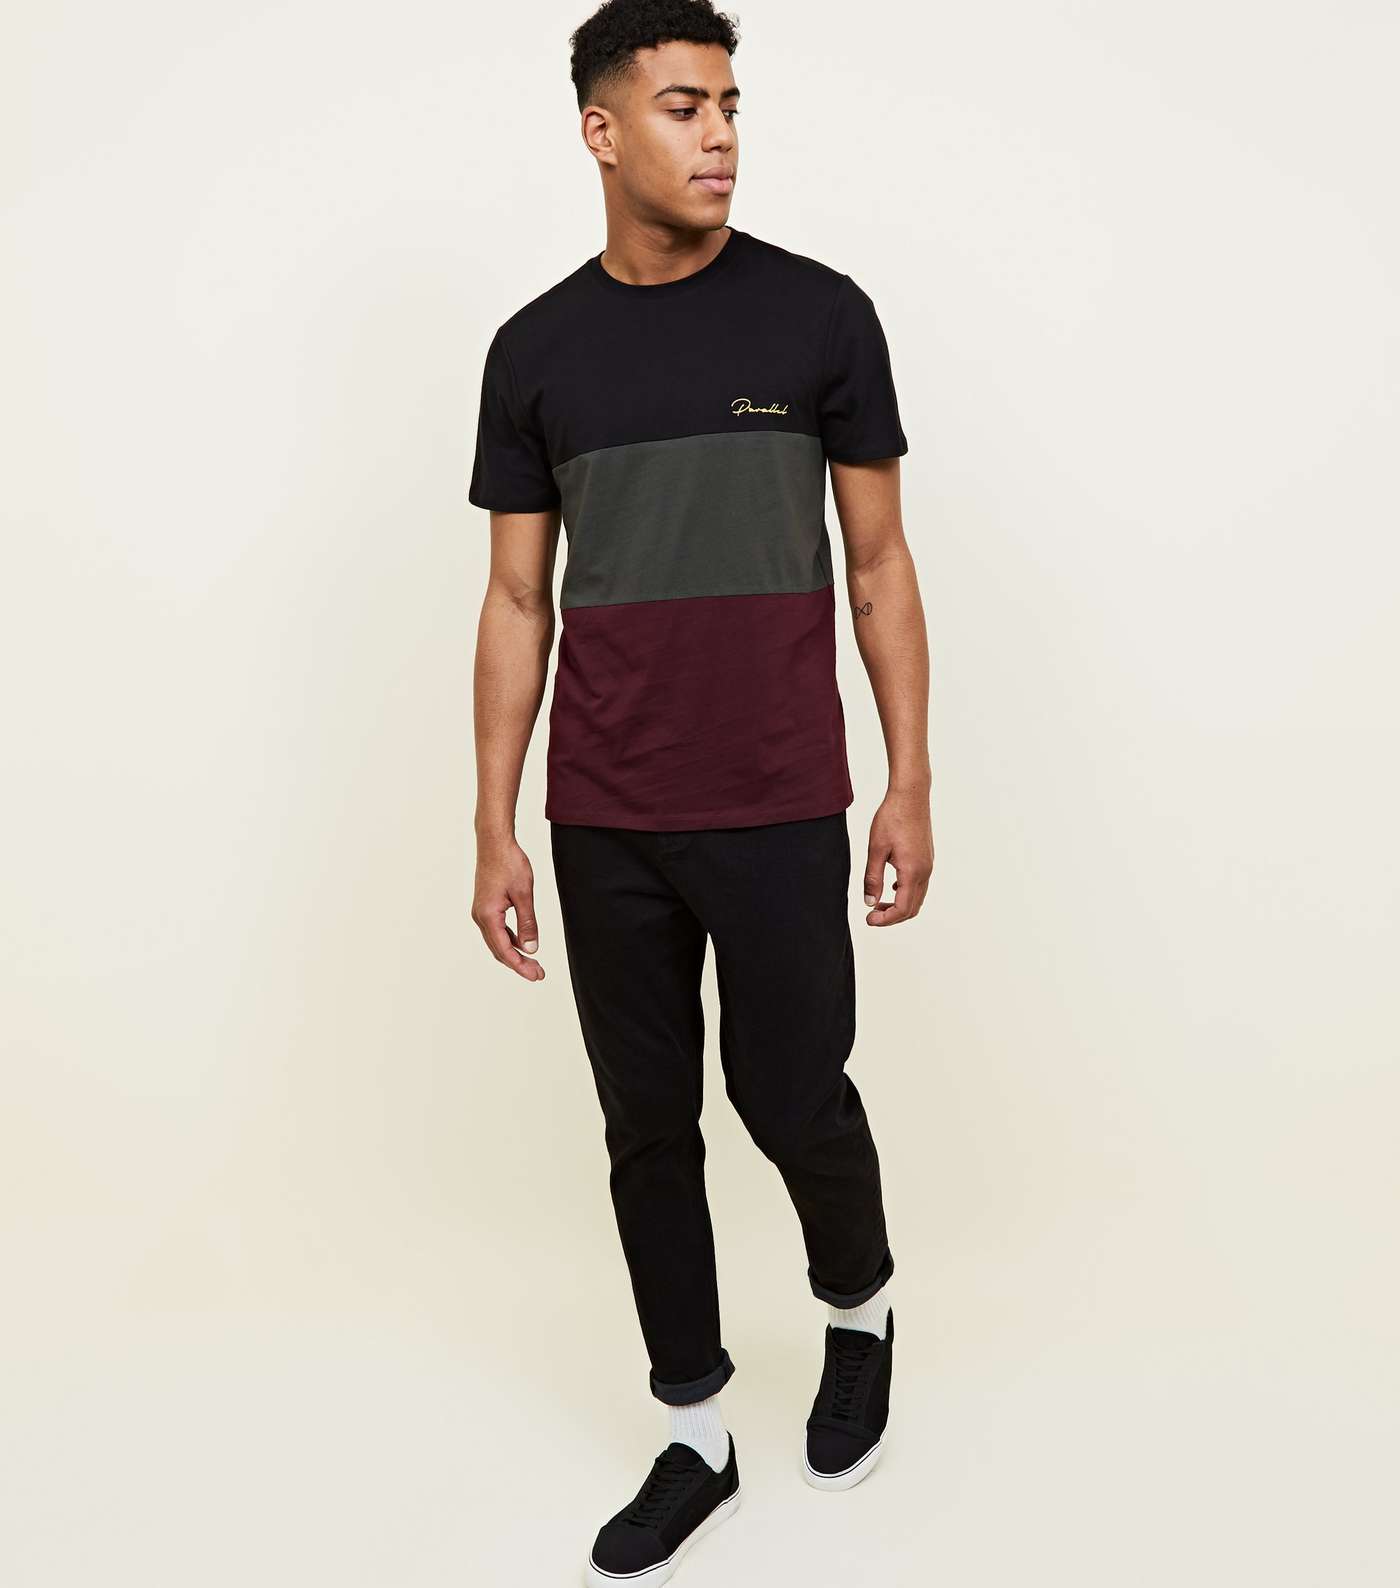 Burgundy Colour Block Parallel Embroidered T-Shirt Image 2